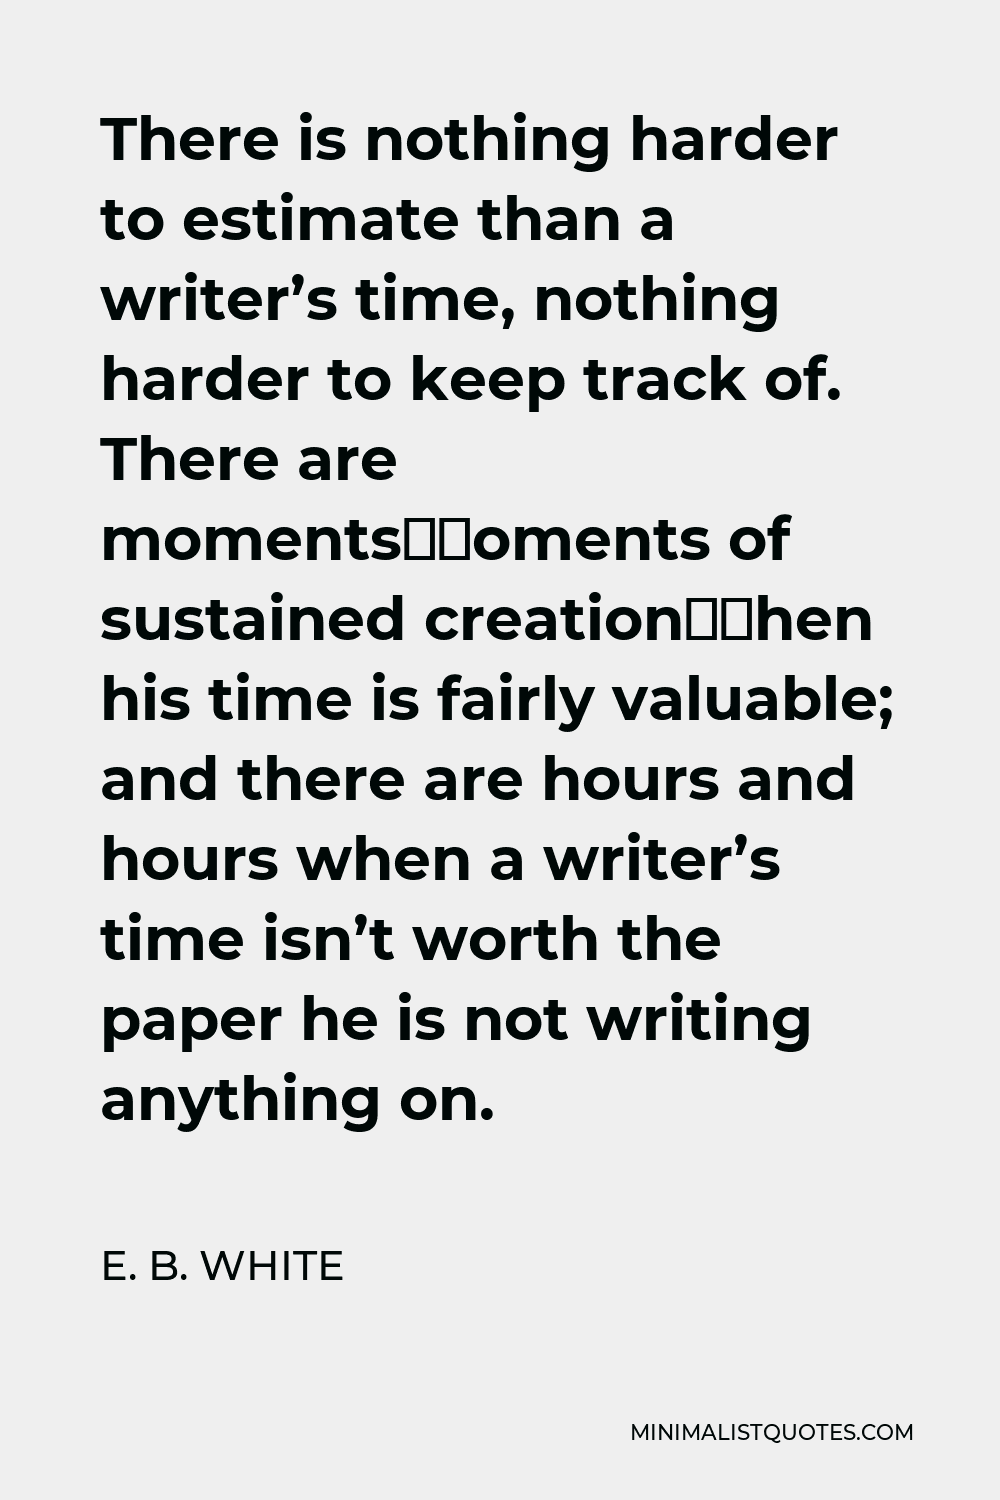 E. B. White Quote - There is nothing harder to estimate than a writer’s time, nothing harder to keep track of. There are moments—moments of sustained creation—when his time is fairly valuable; and there are hours and hours when a writer’s time isn’t worth the paper he is not writing anything on.